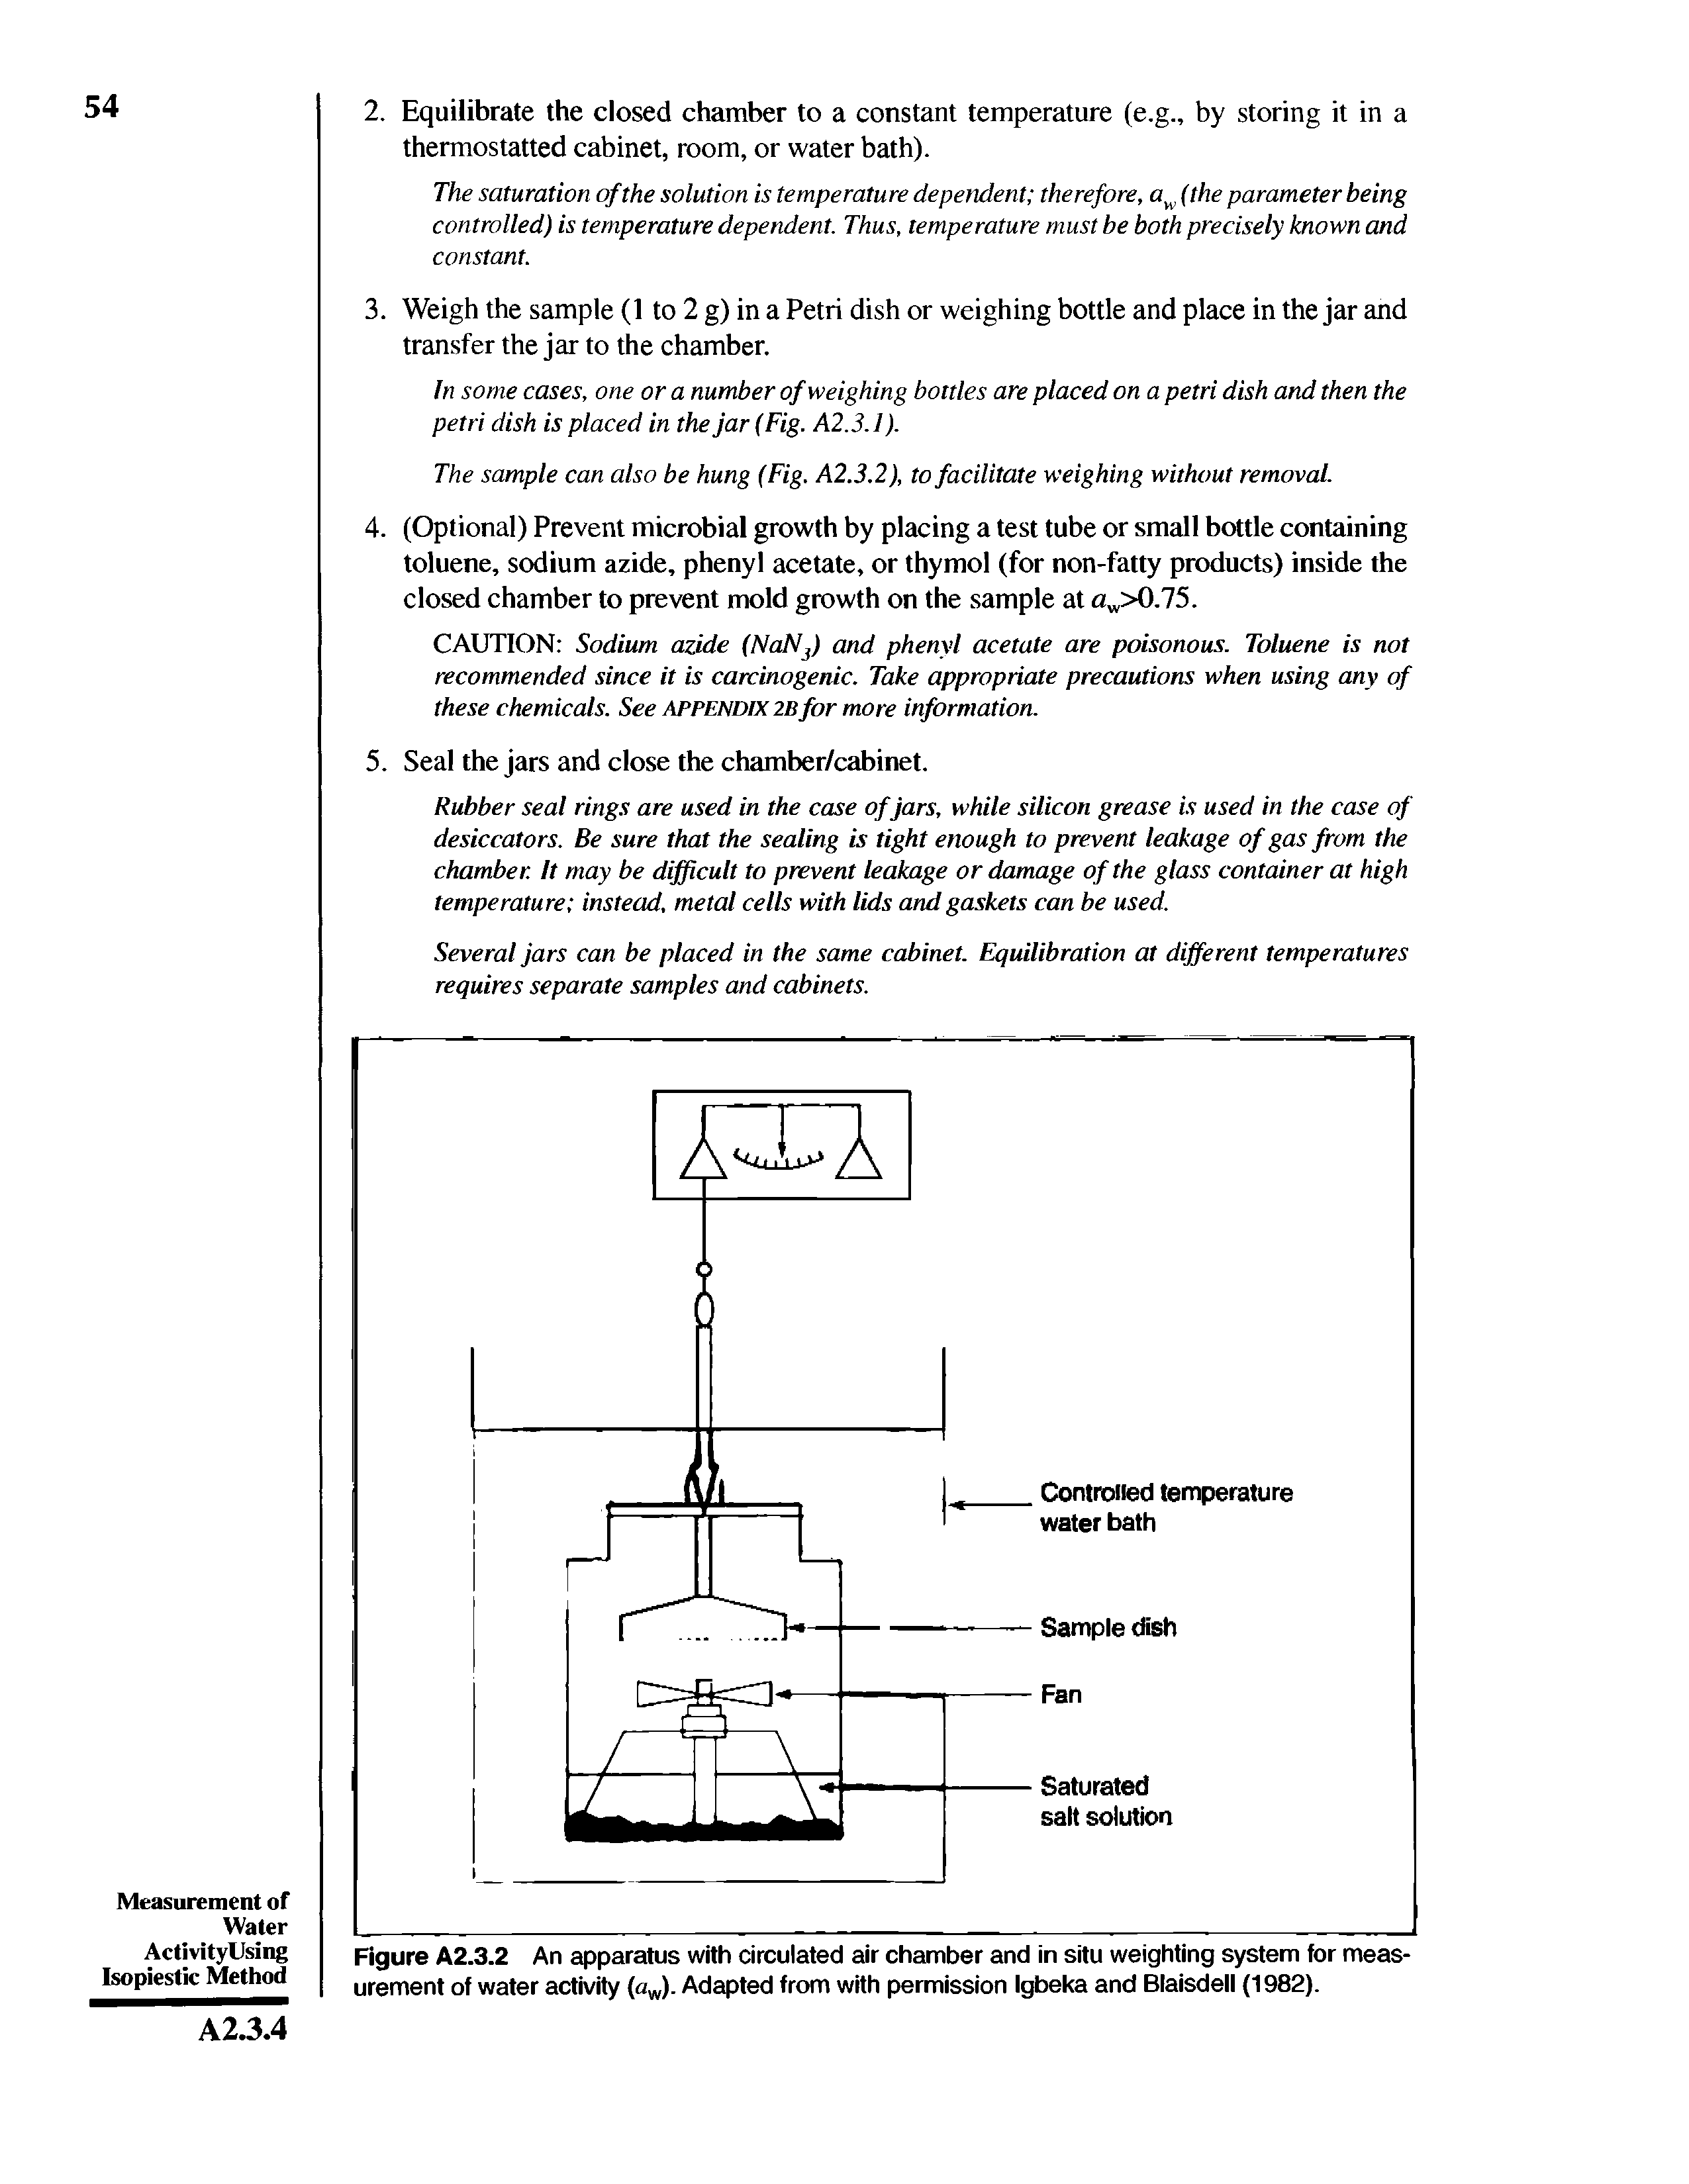 Figure A2.3.2 An apparatus with circulated air chamber and in situ weighting system for measurement of water activity (aw). Adapted from with permission Igbeka and Blaisdell (1982).